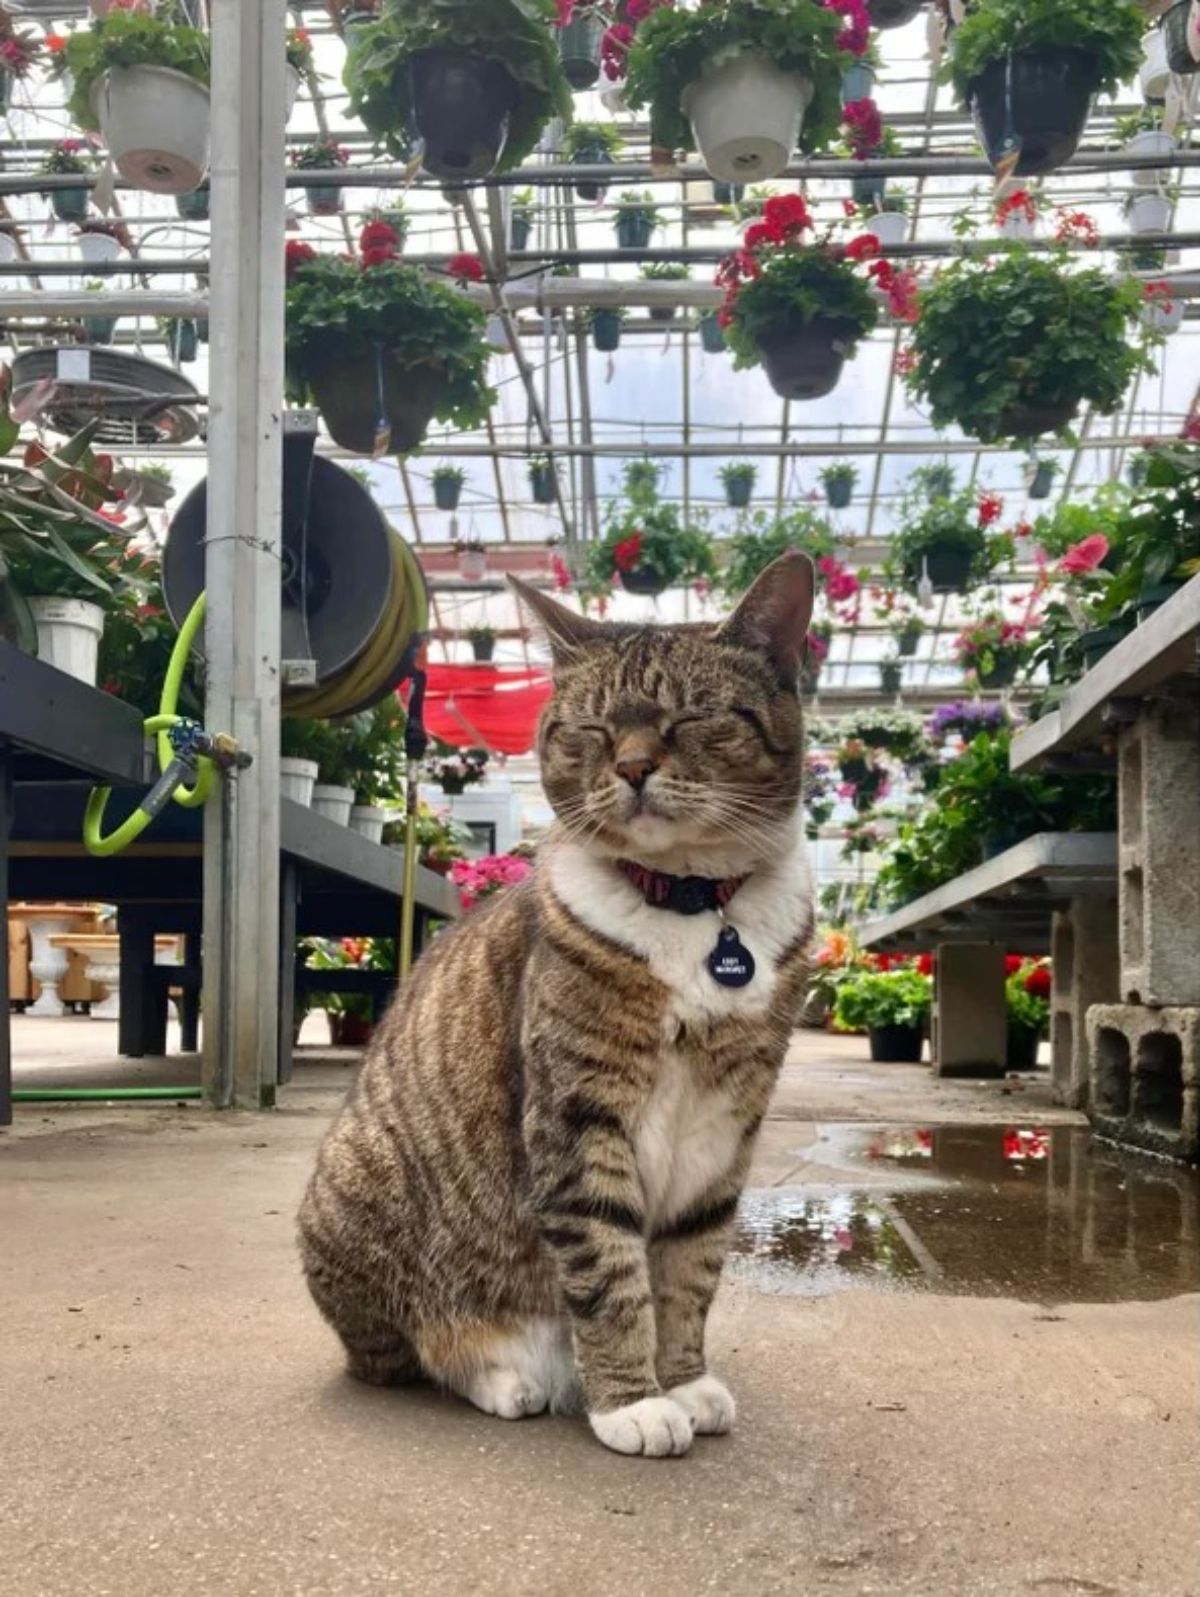 brown and white tabby cat sitting on the floor of a greenhouse